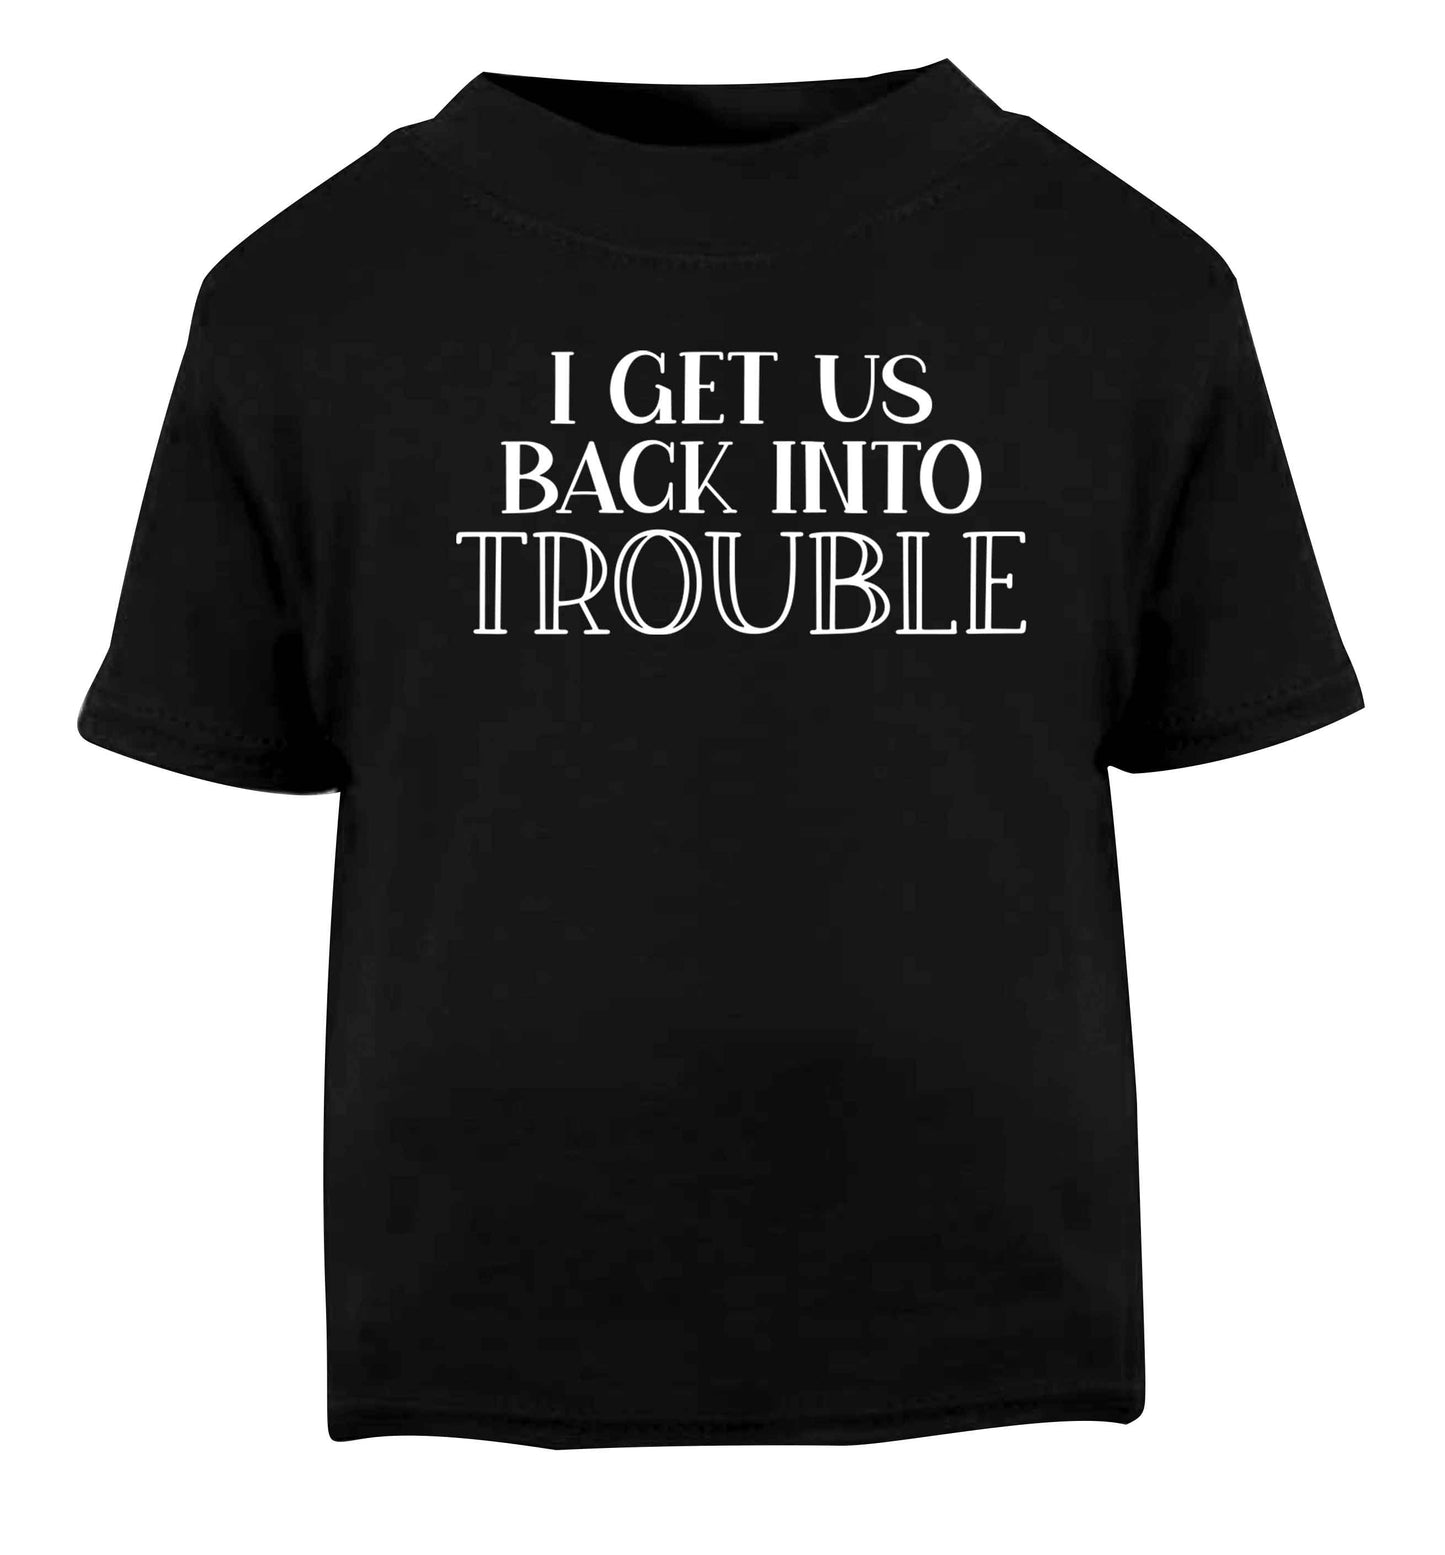 I get us back into trouble Black baby toddler Tshirt 2 years